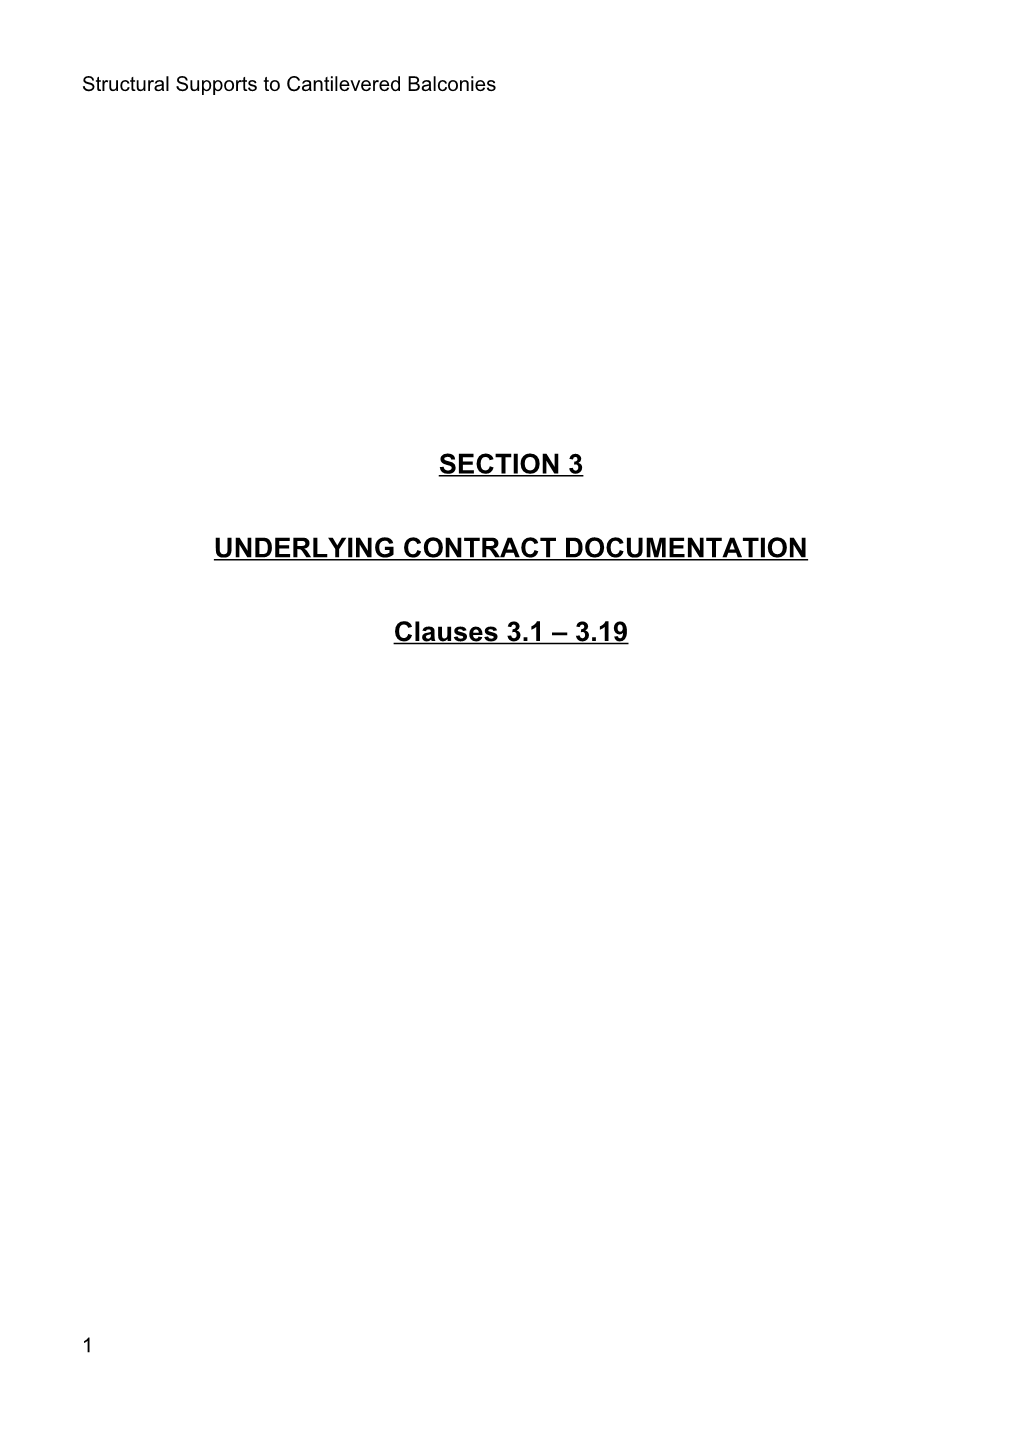 Section 3 - Underlying Contract Documentation